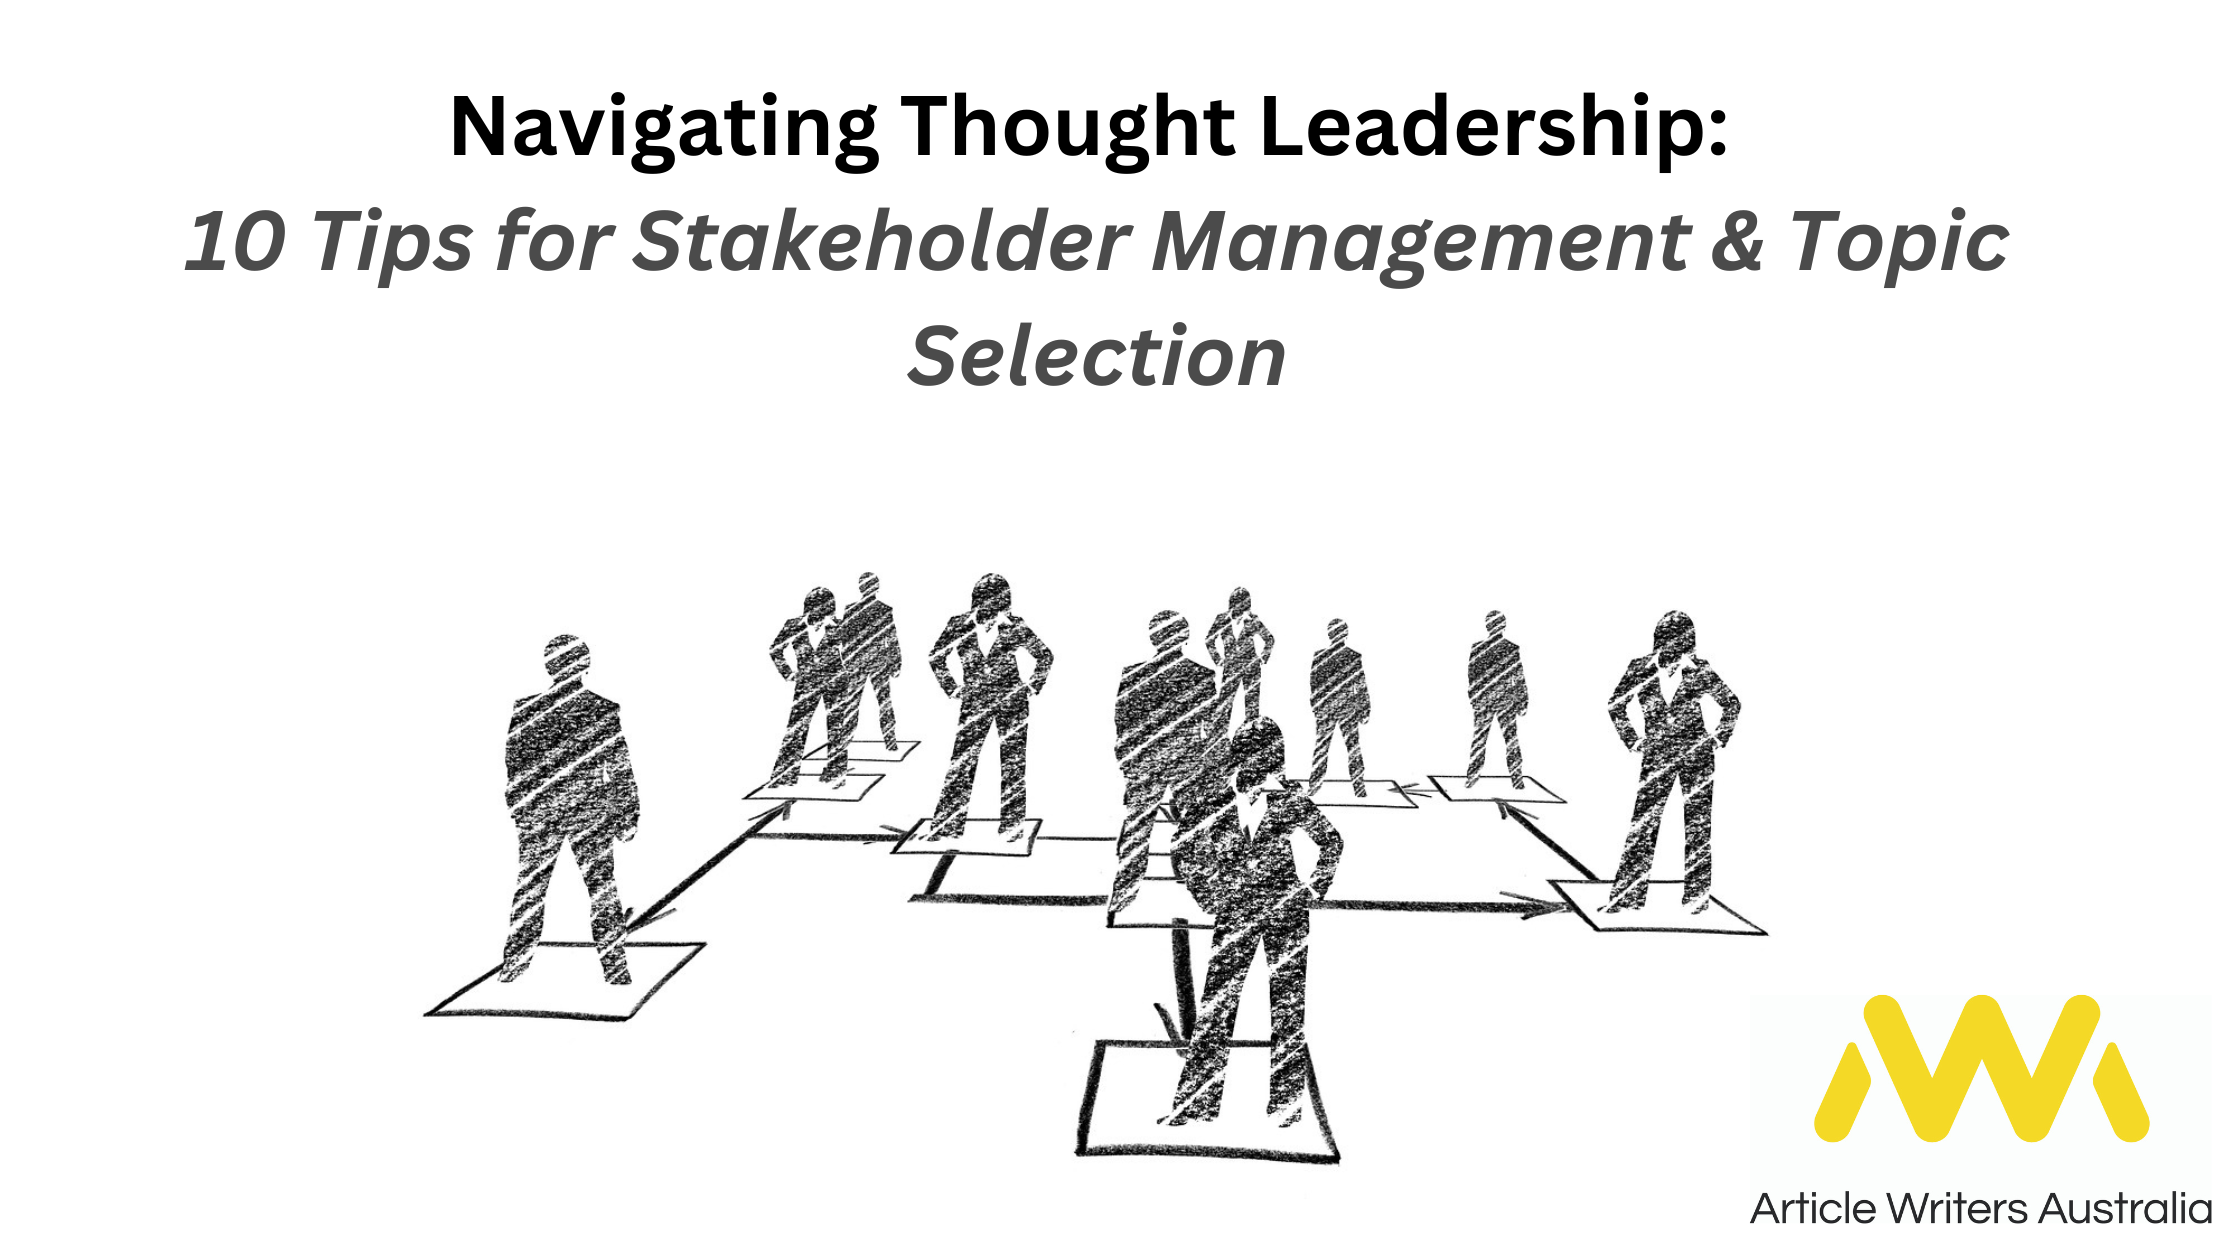 C Suite Thought Leaders